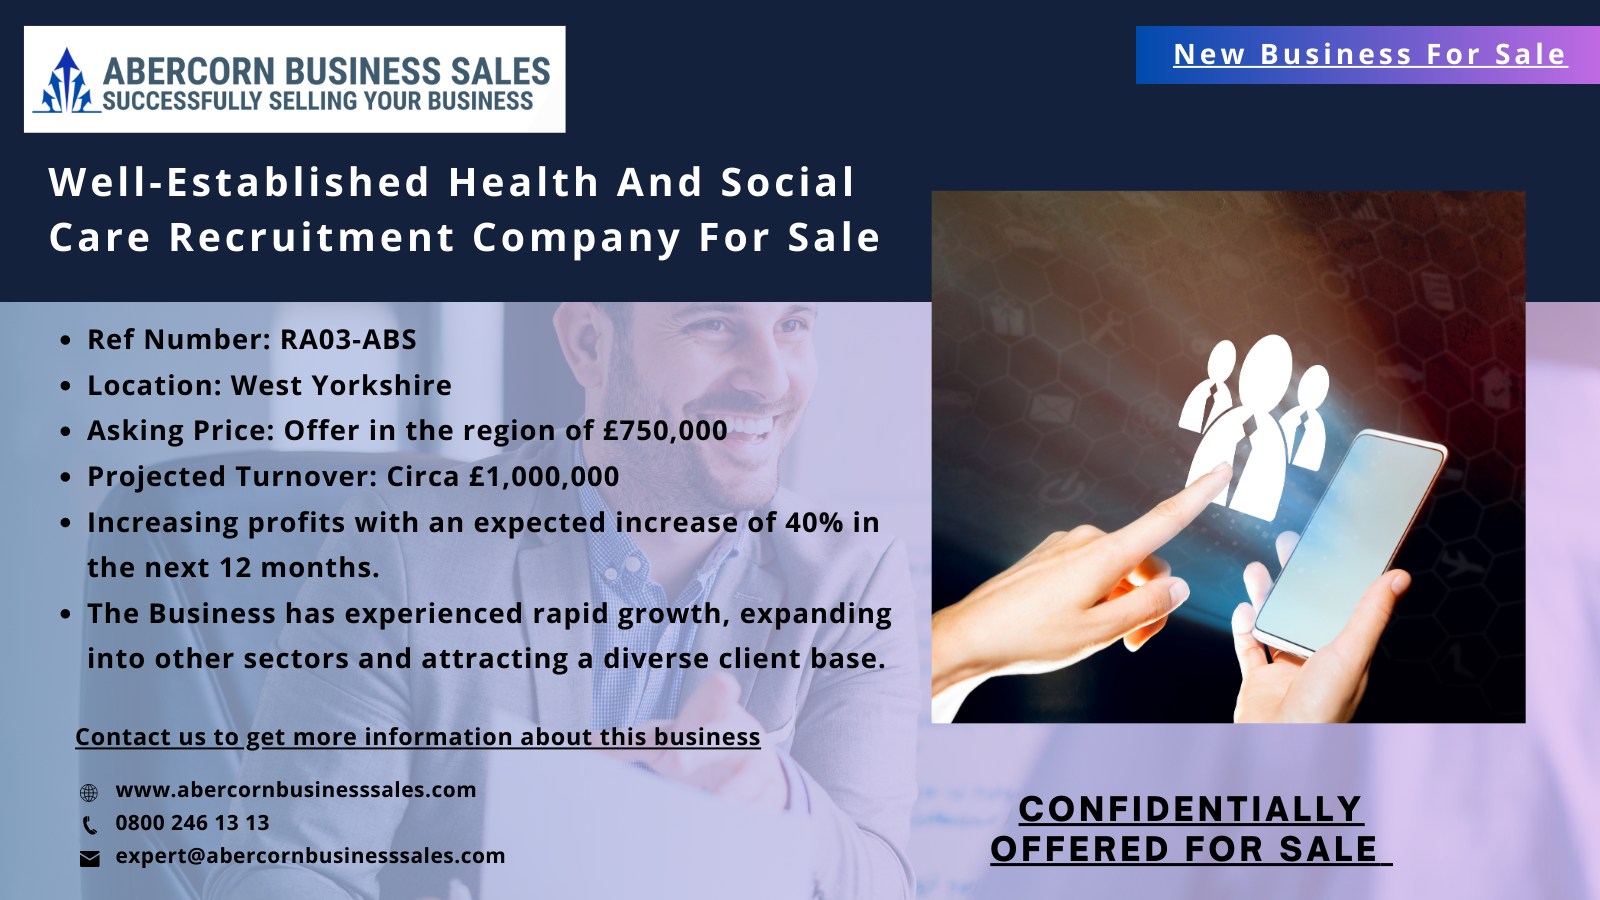 RA03-ABS -Well-established Health and Social Care Recruitment Company for Sale